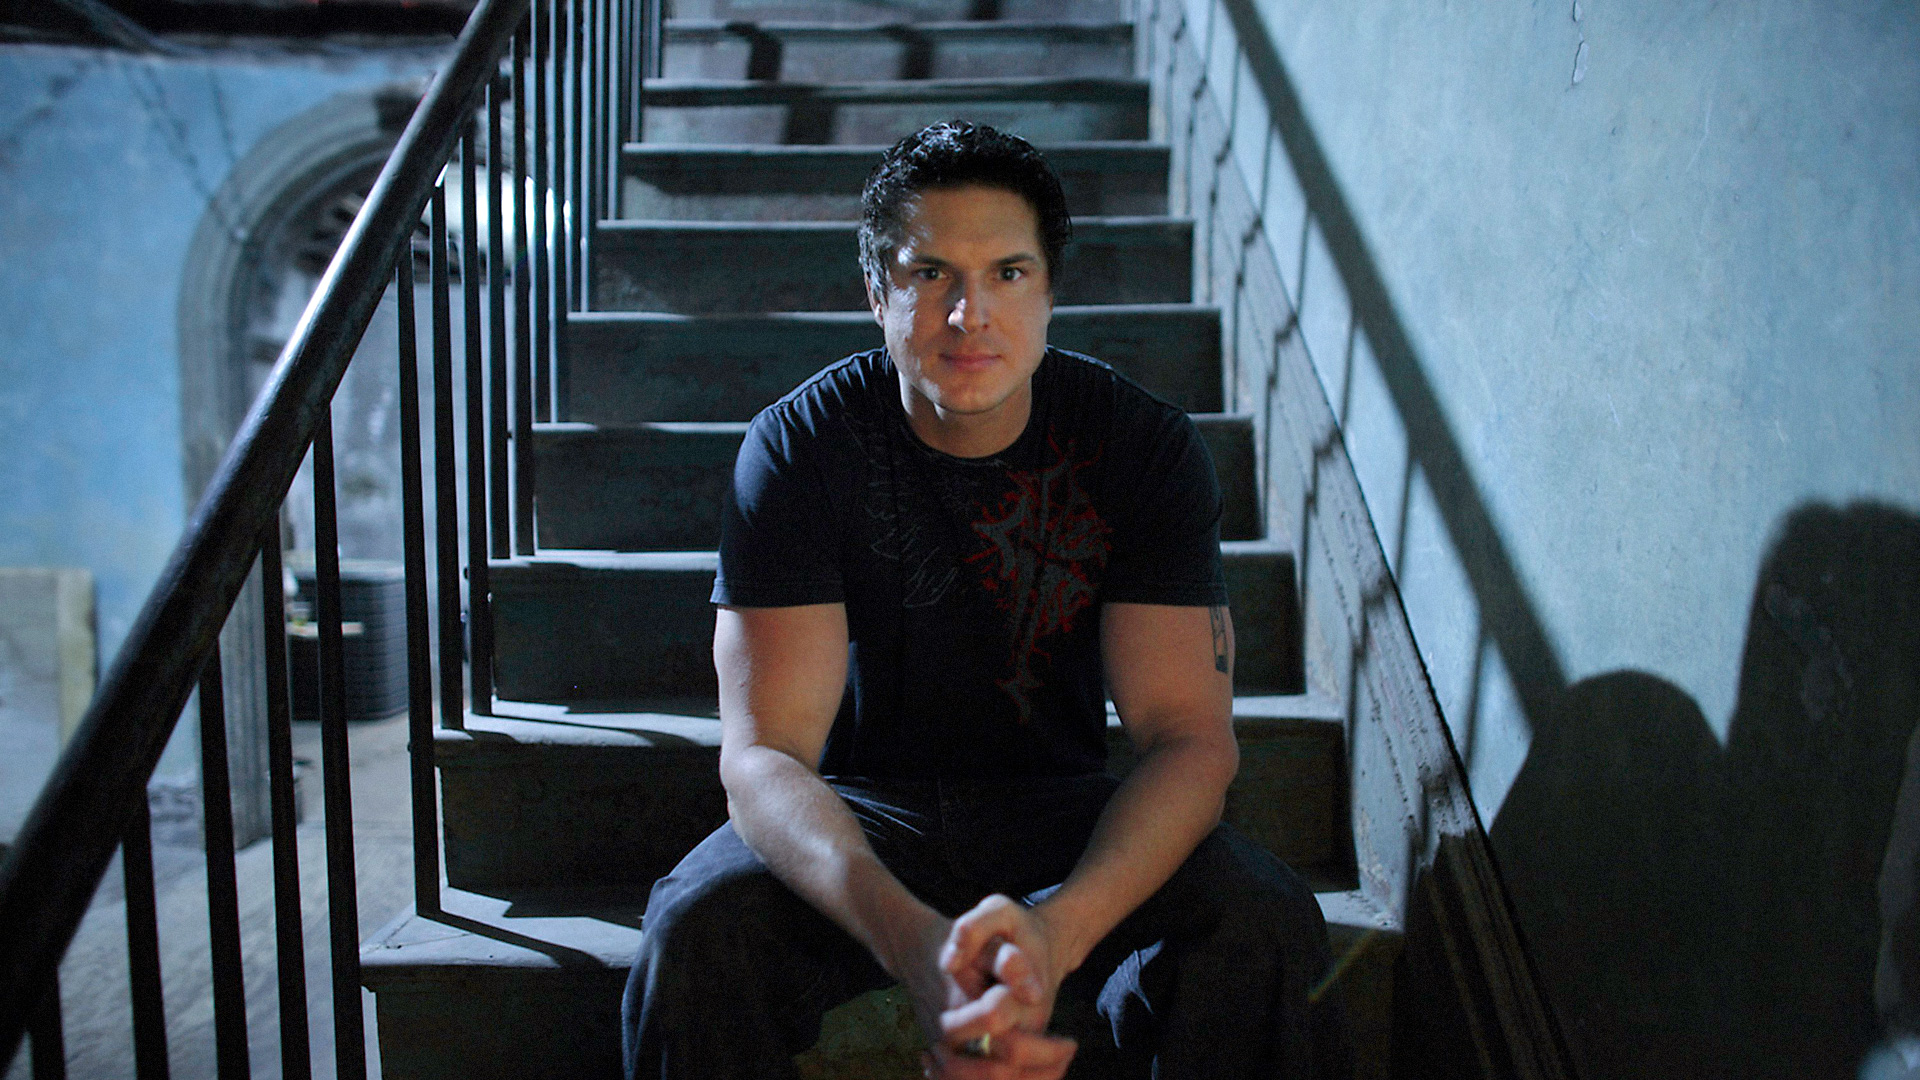 ghost adventures wallpaper,muscle,photography,t shirt,flash photography,smile